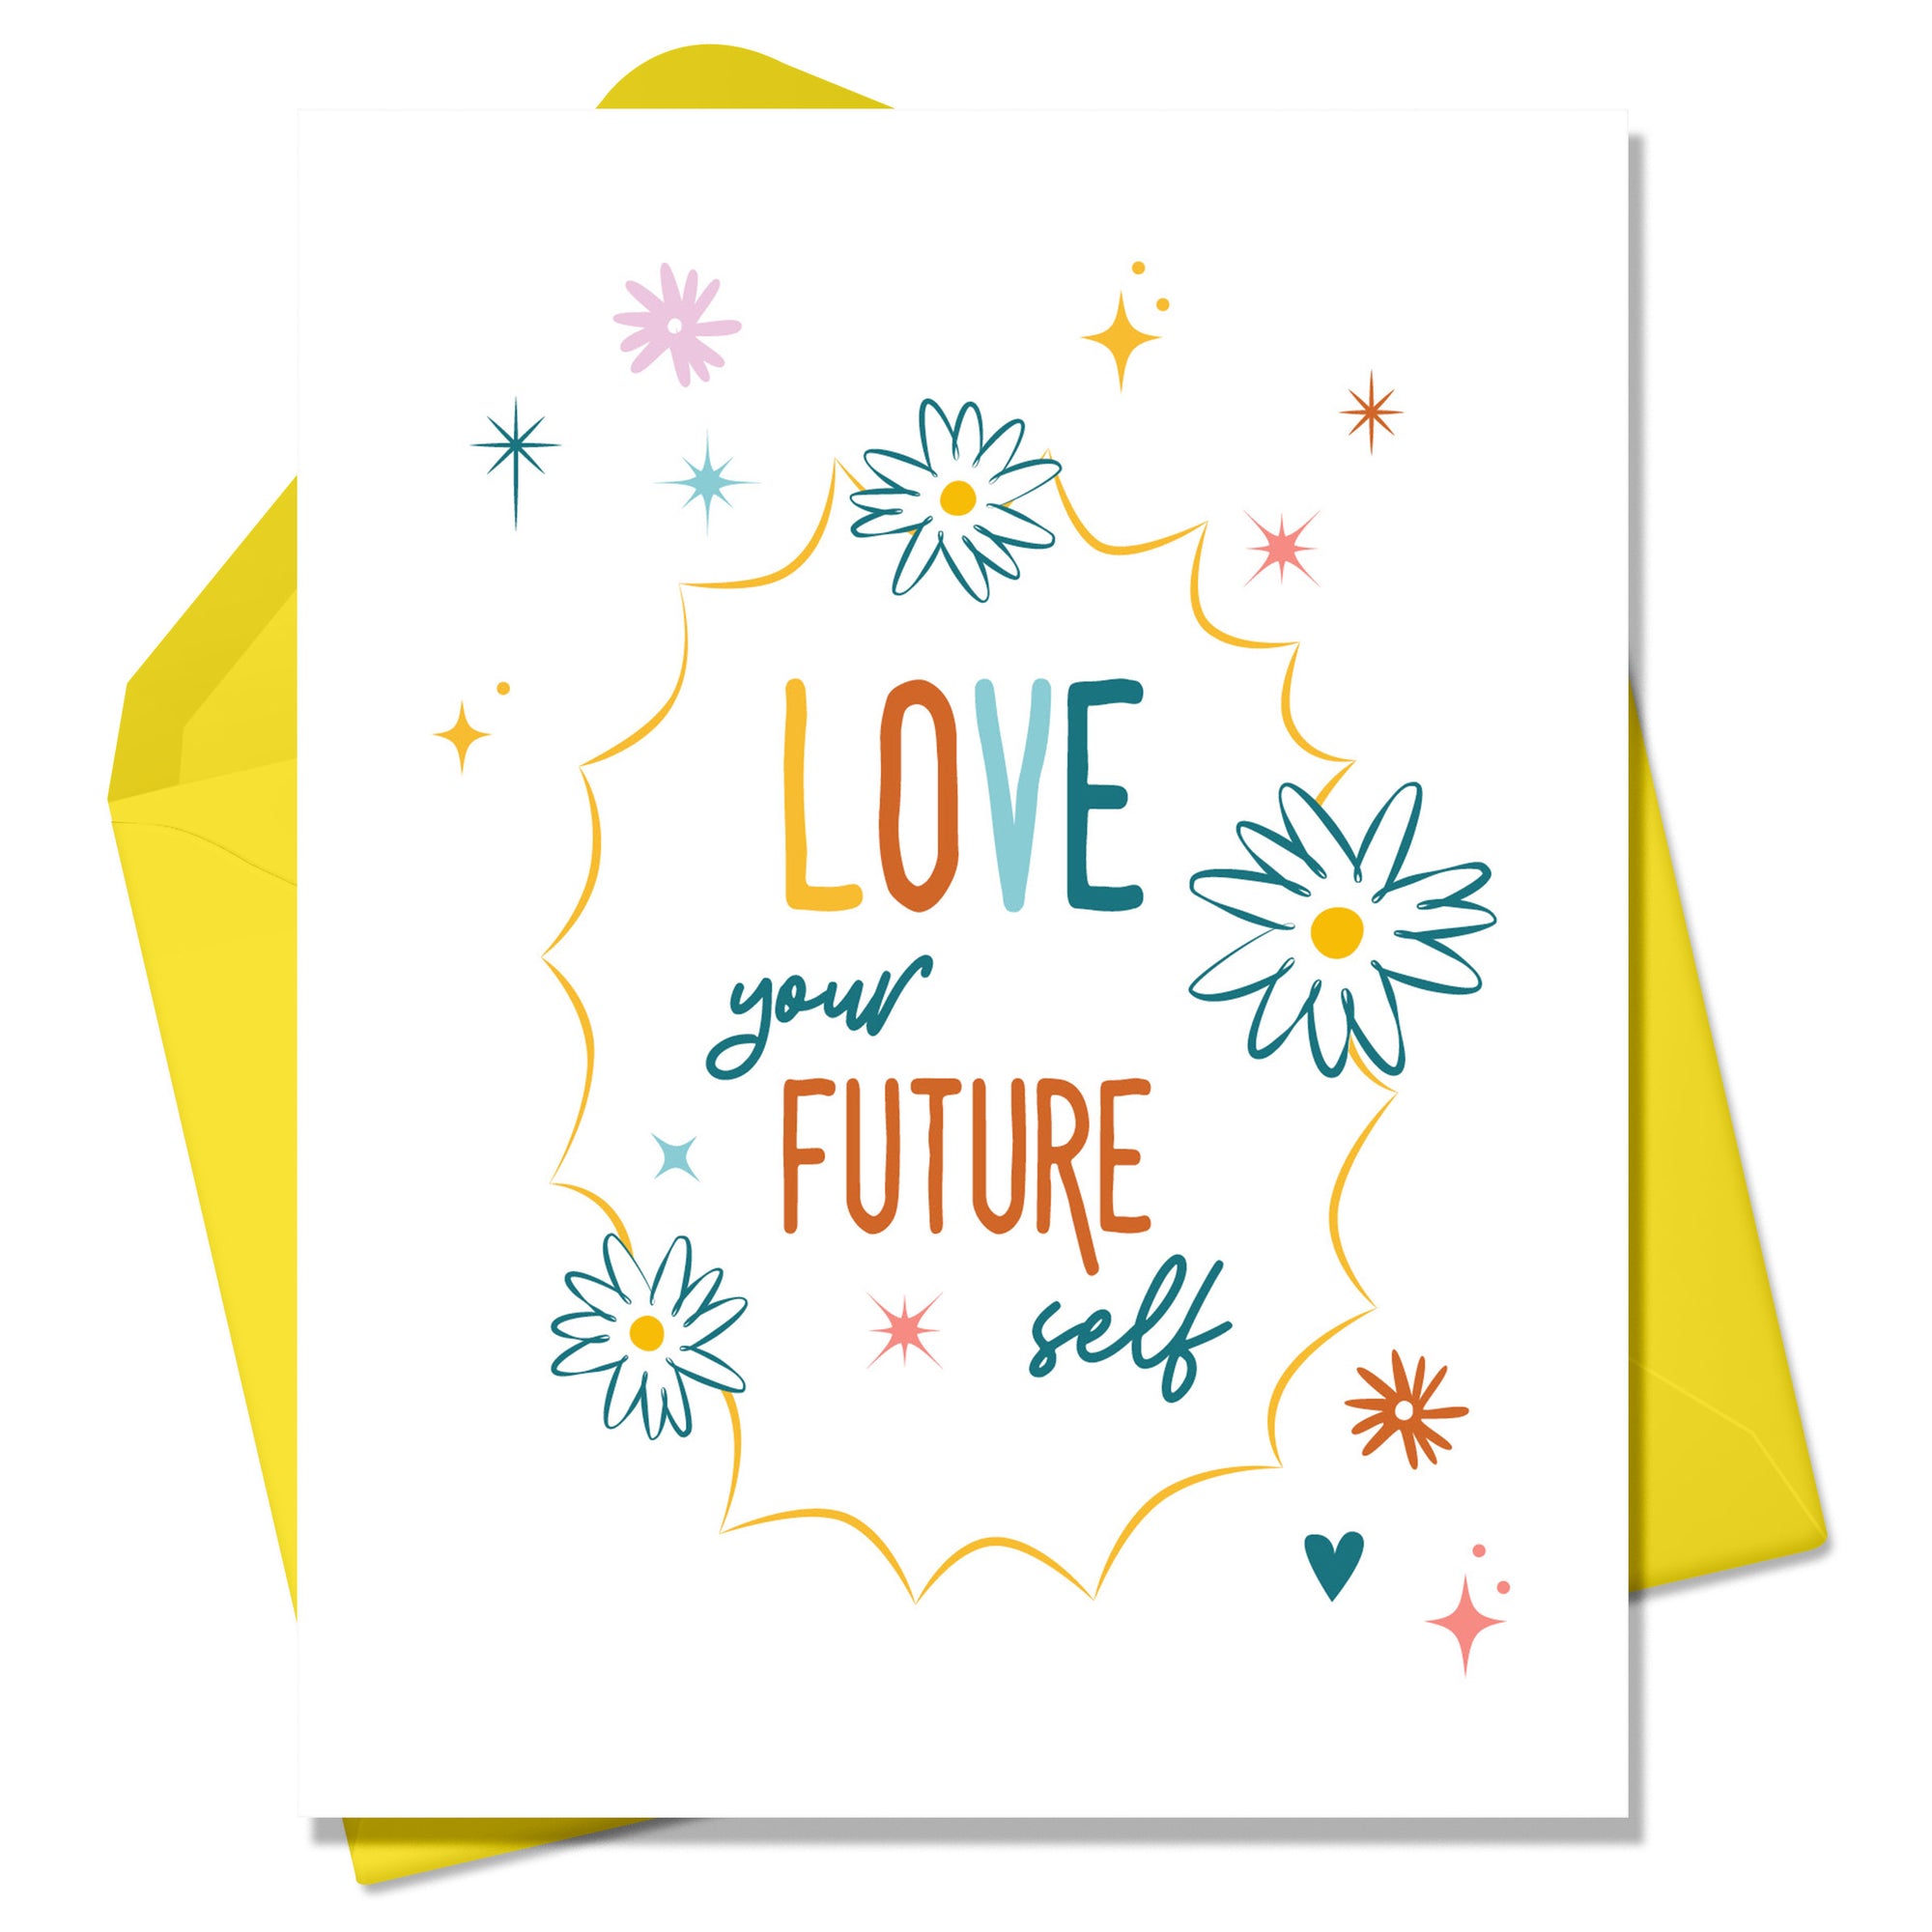 More love less ego  Cool Positivity Greeting Card for Sale by